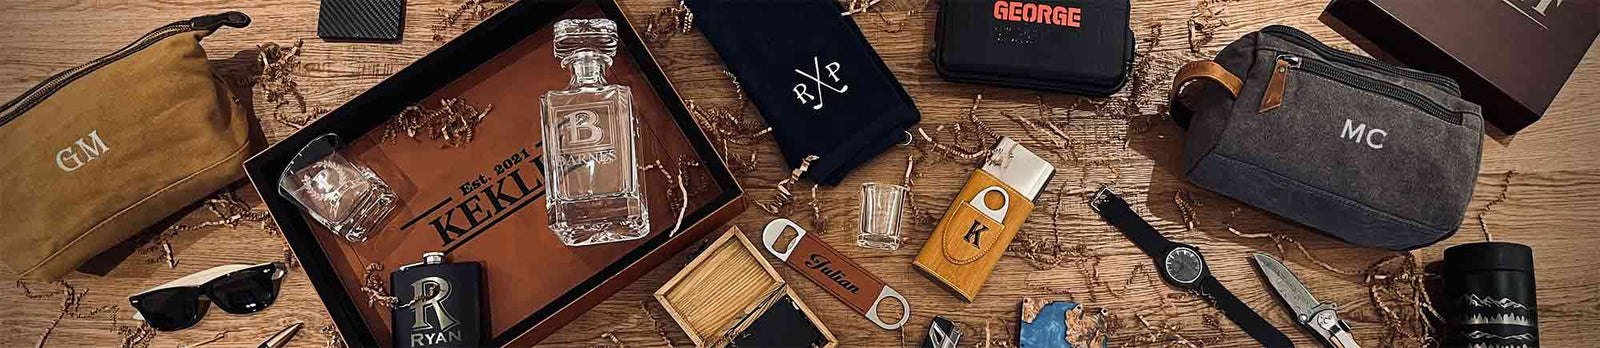 Irresistible Presents for Men: Uncover Gifts Guys Love at ekuBOX